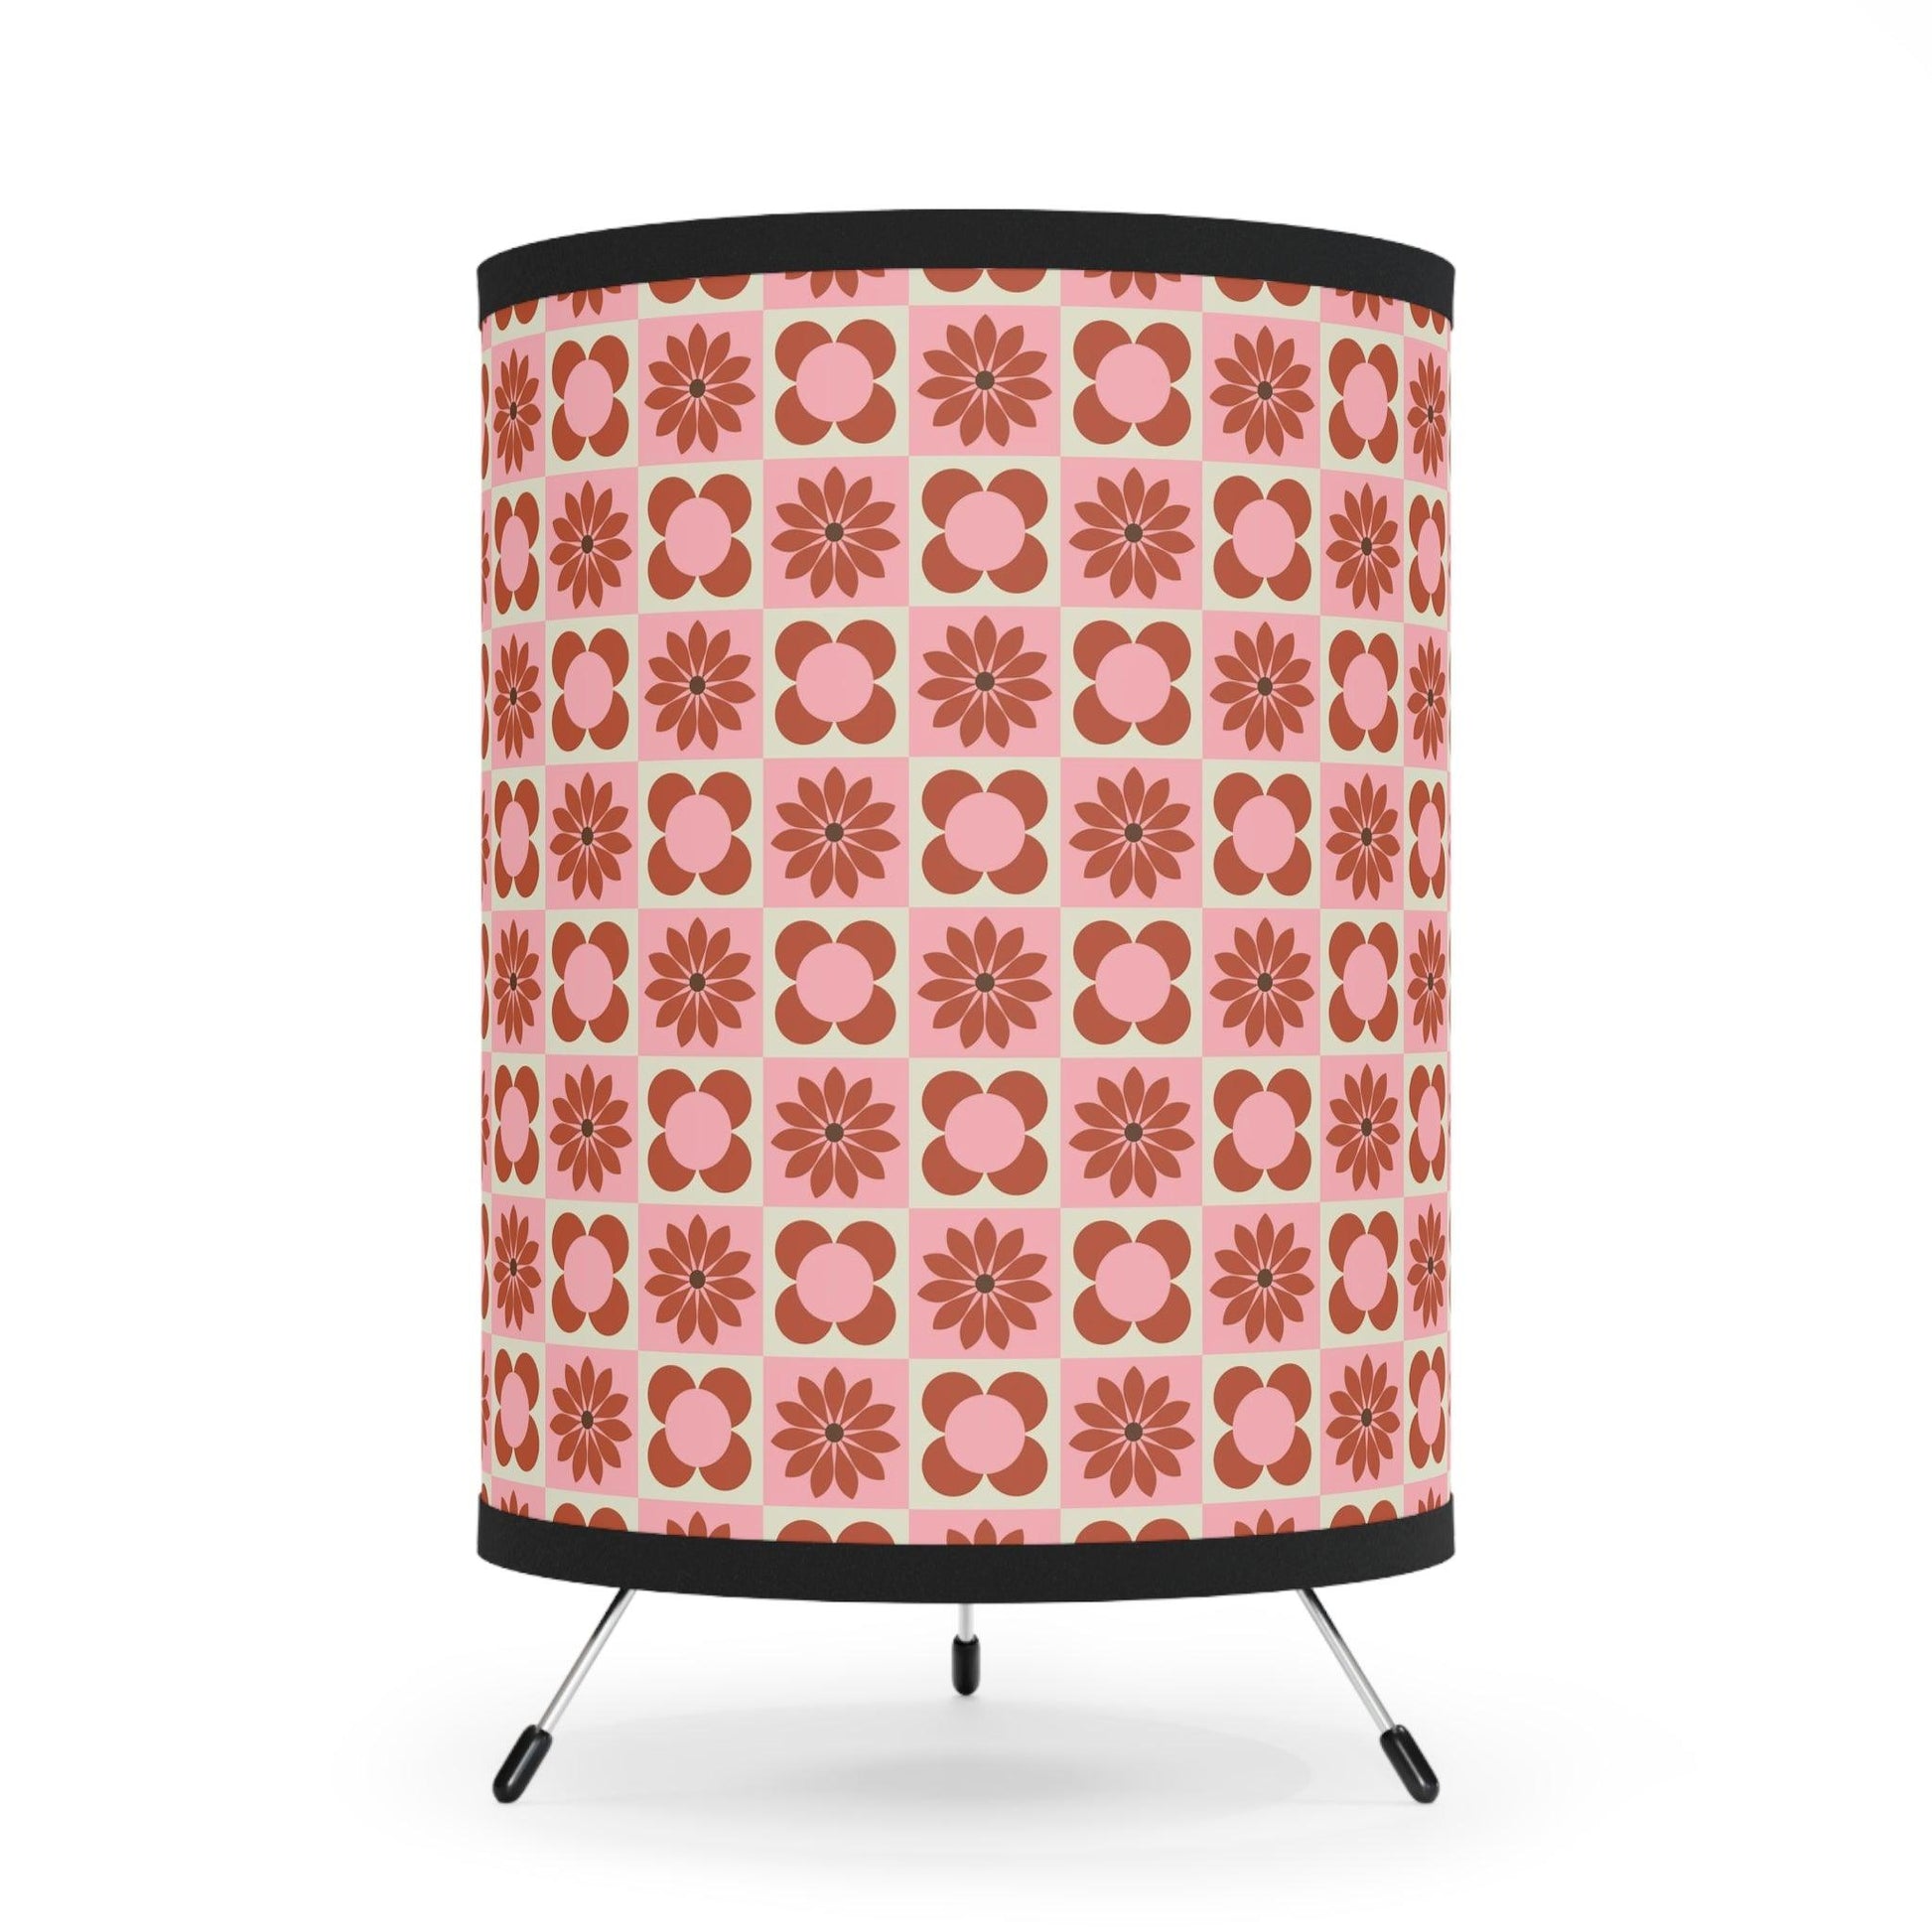 Retro 50s 60s Mid Century Mod Pink & Red Tabletop Accent Lamp | lovevisionkarma.com